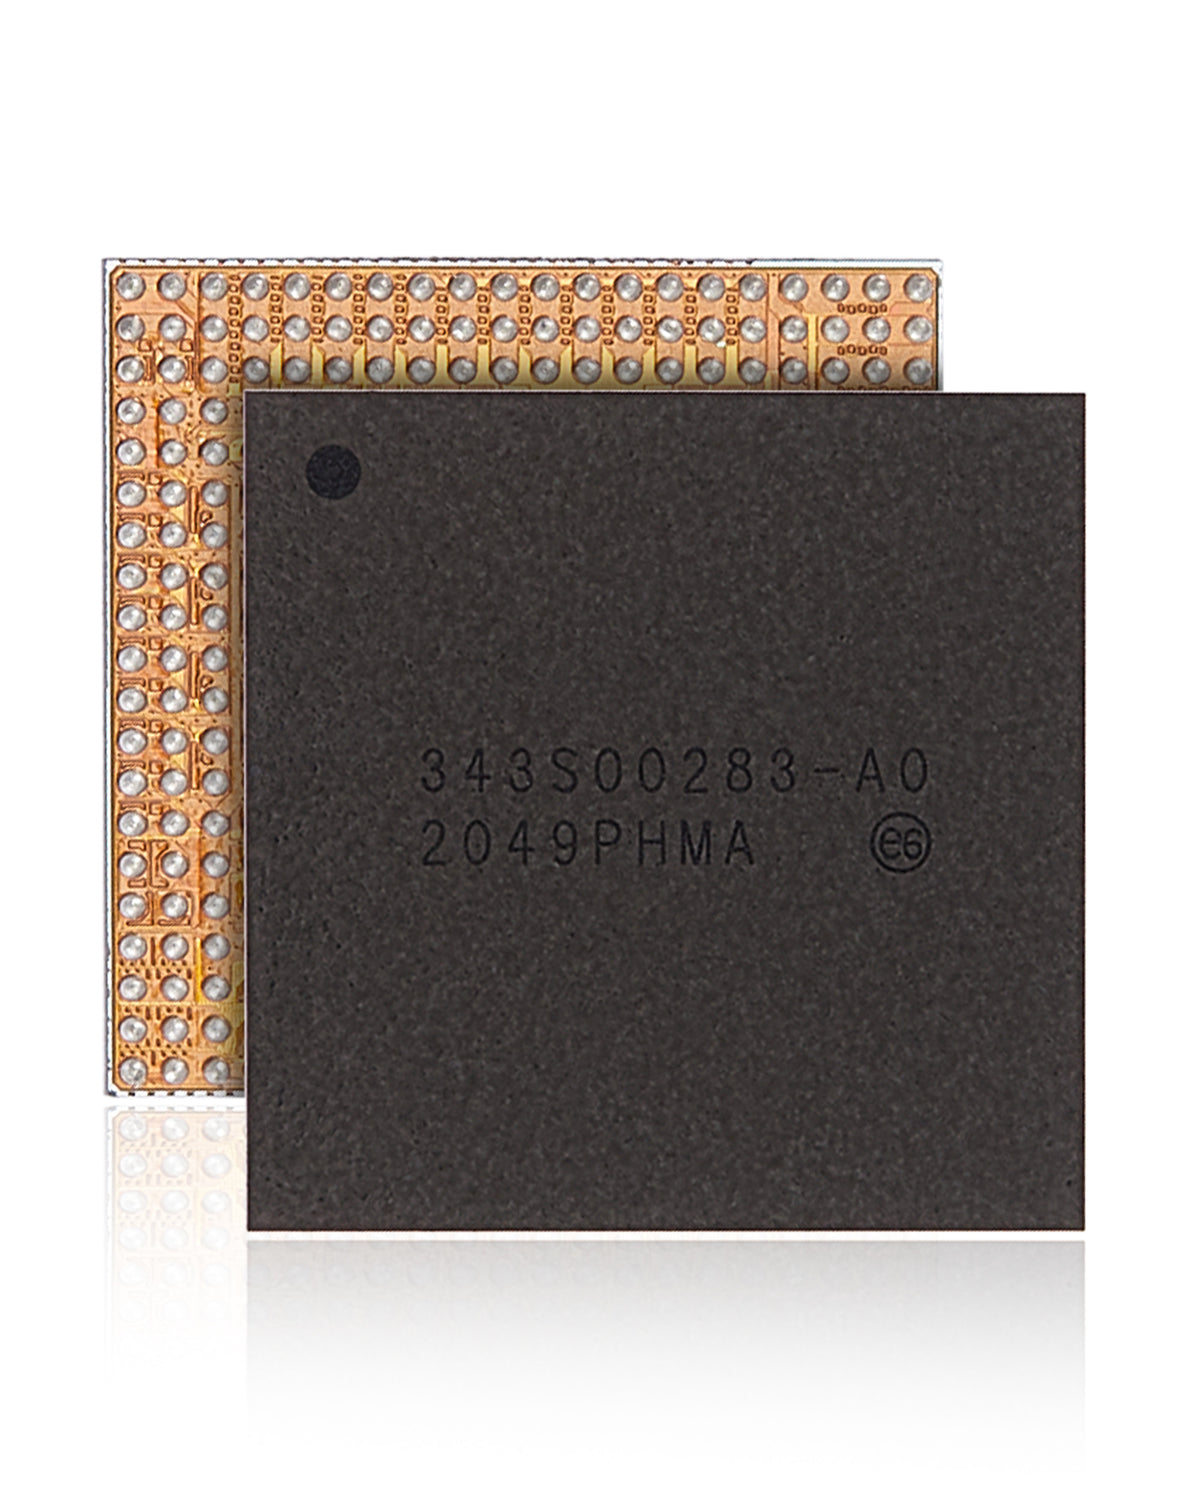 POWER MANAGEMENT PMIC IC COMPATIBLE WITH IPAD 8 (2020) (343S00283)